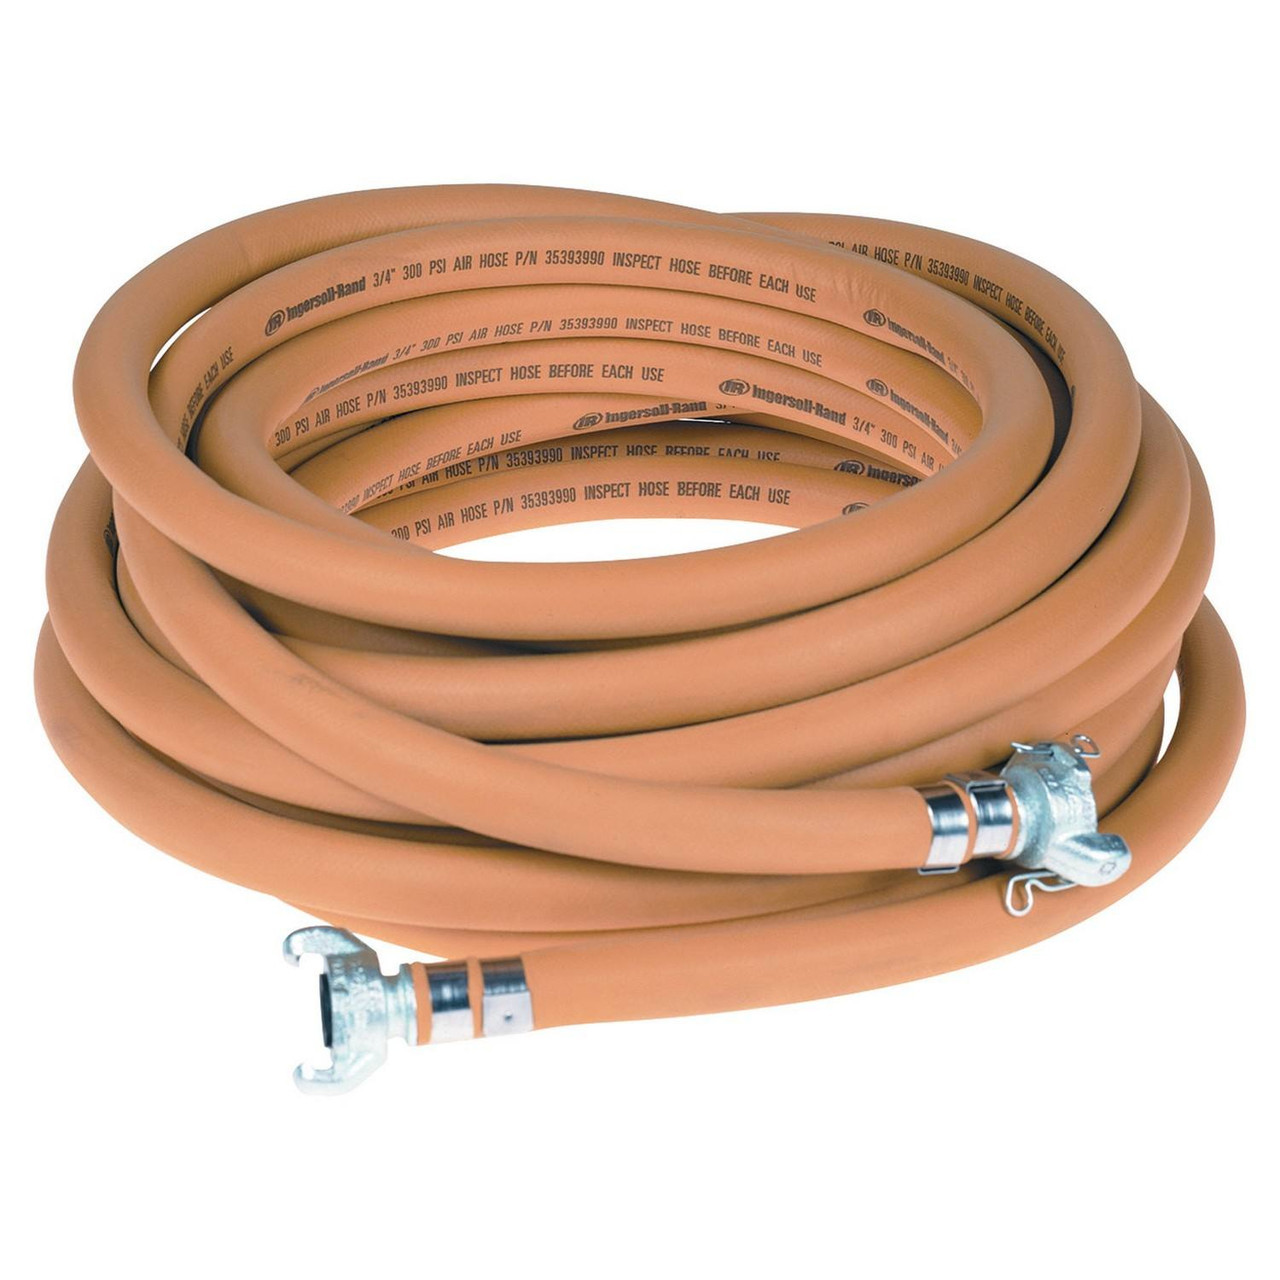 Ingersoll Rand 3/4 Air Hose  22040679 Double-Banded Universal